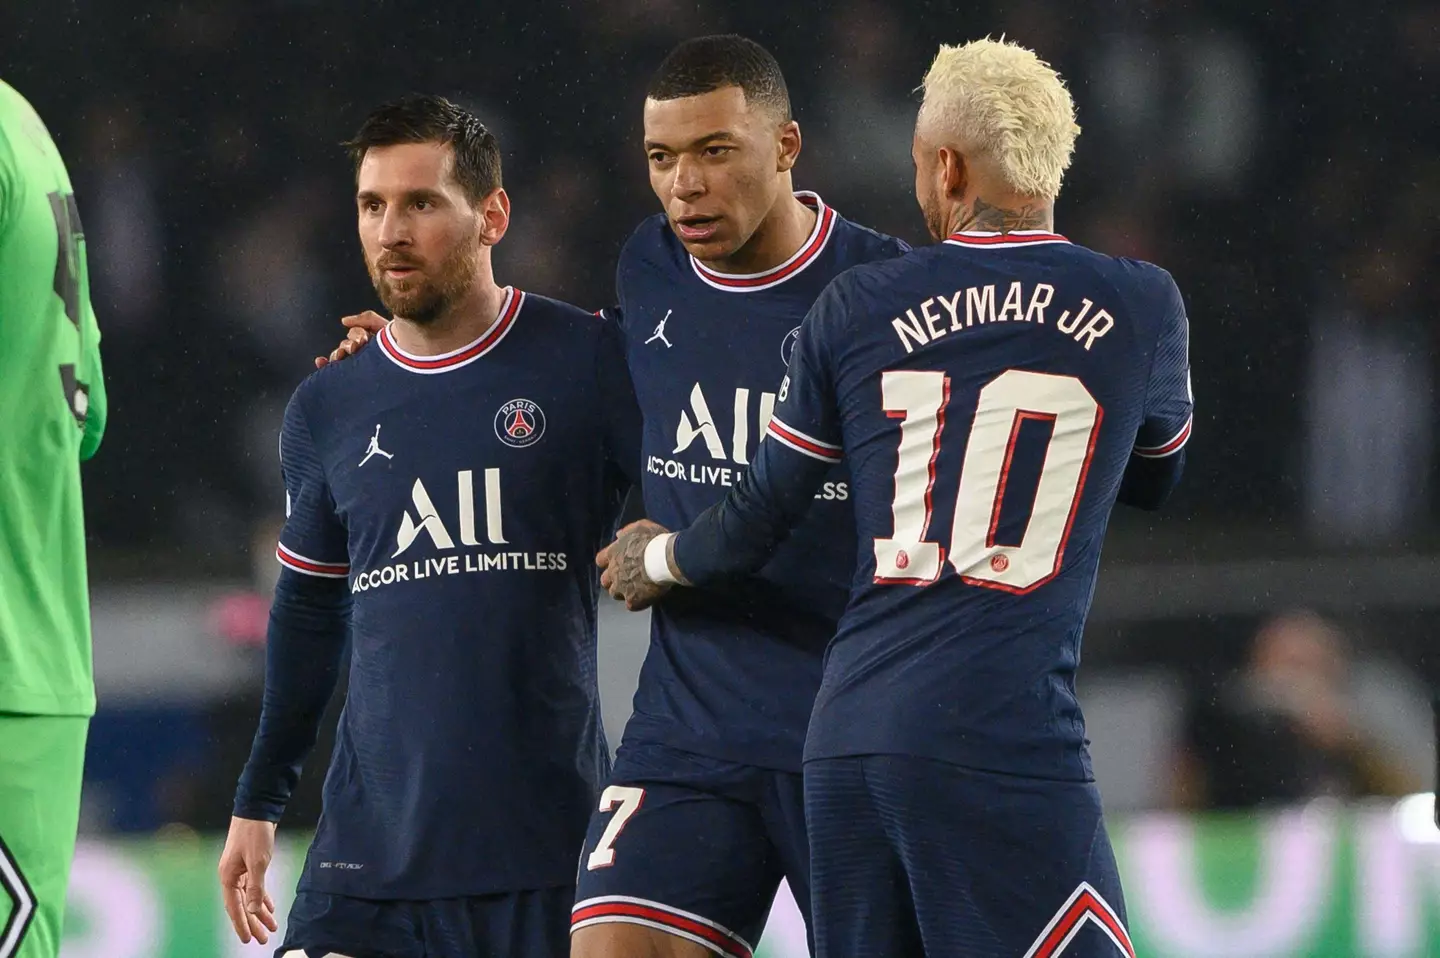 Lionel Messi, Kylian Mbappe and Neymar in action for PSG. Image: Alamy